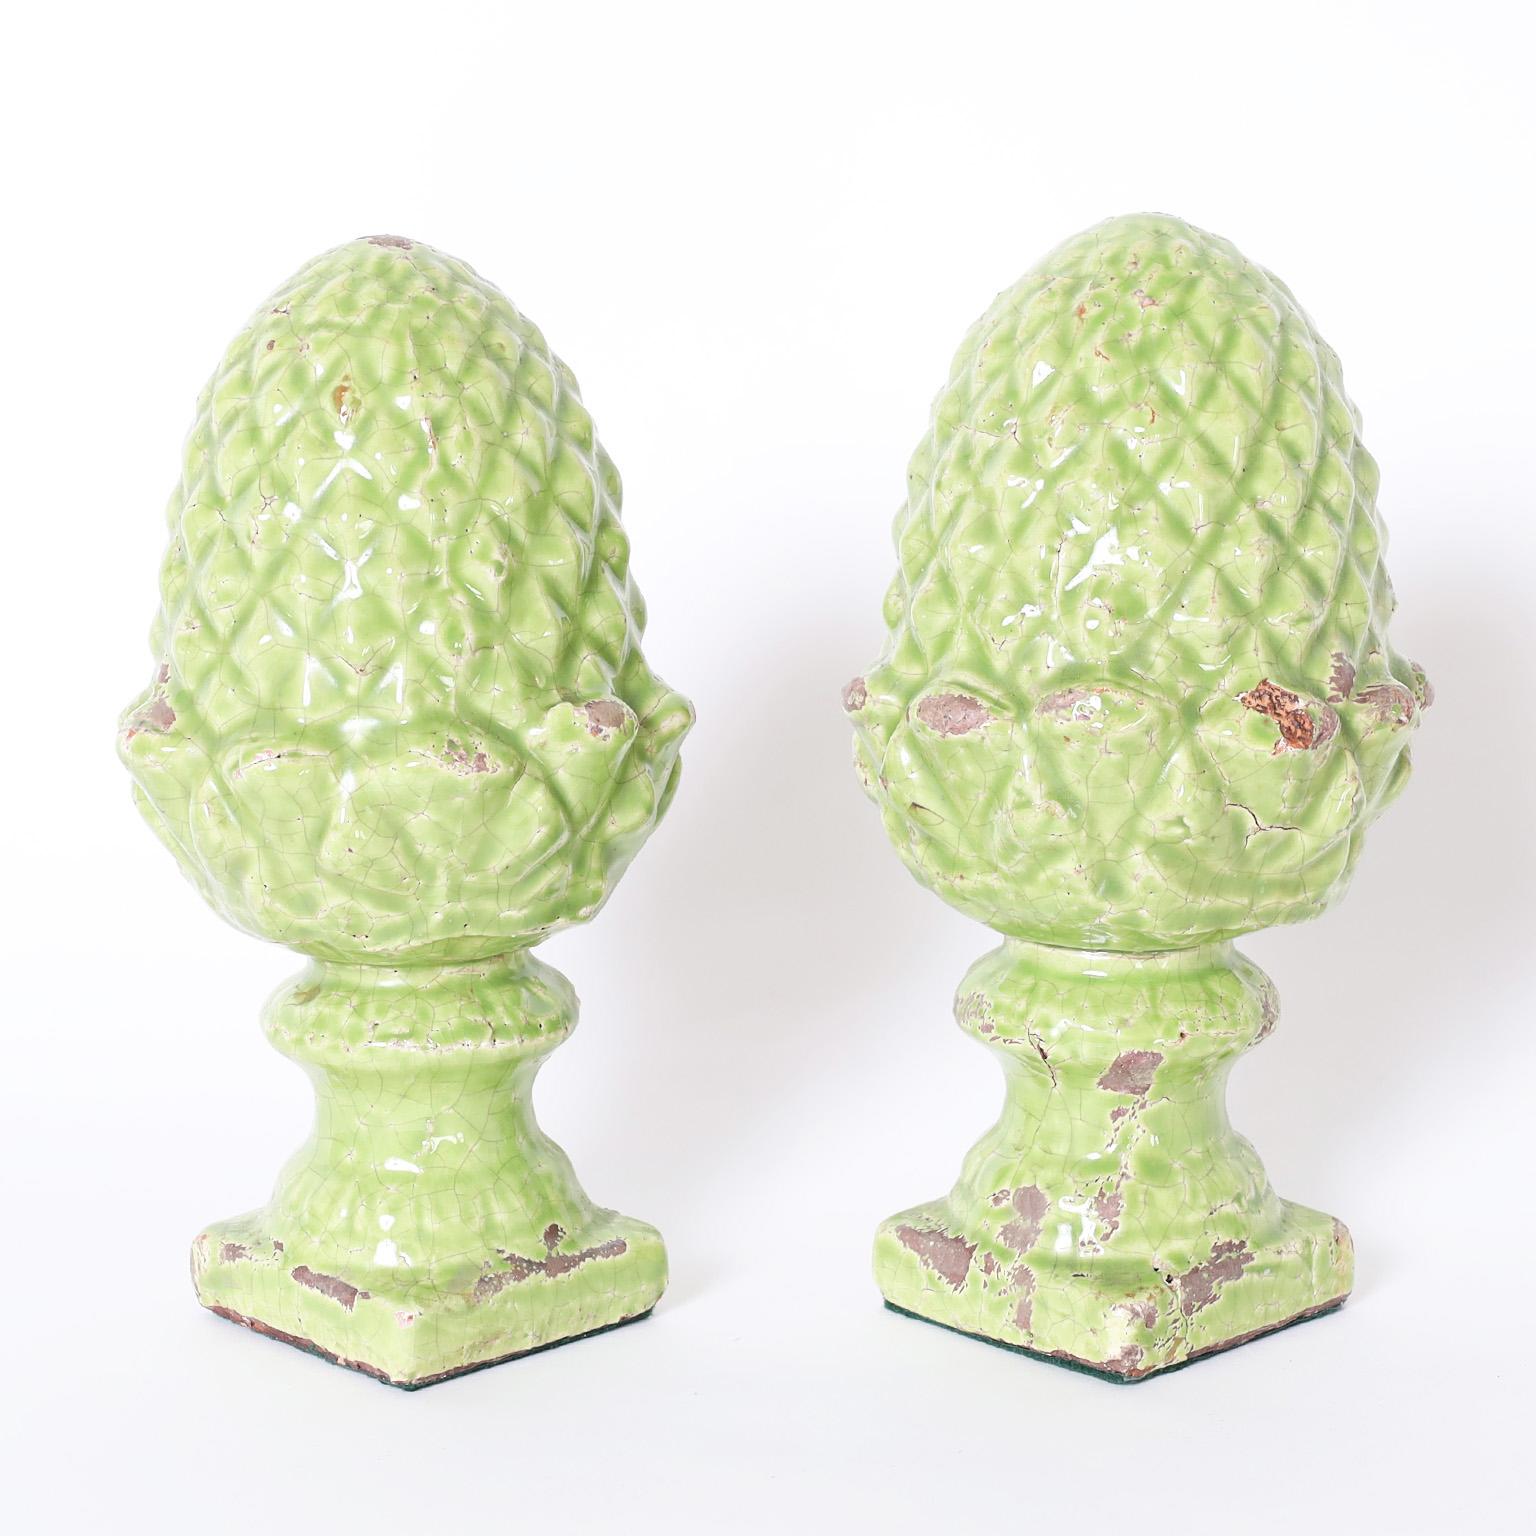 Standout pair of English pineapple finials crafted in terra cotta decorated in a delightful green and glazed, now perfectly worn and crackled.